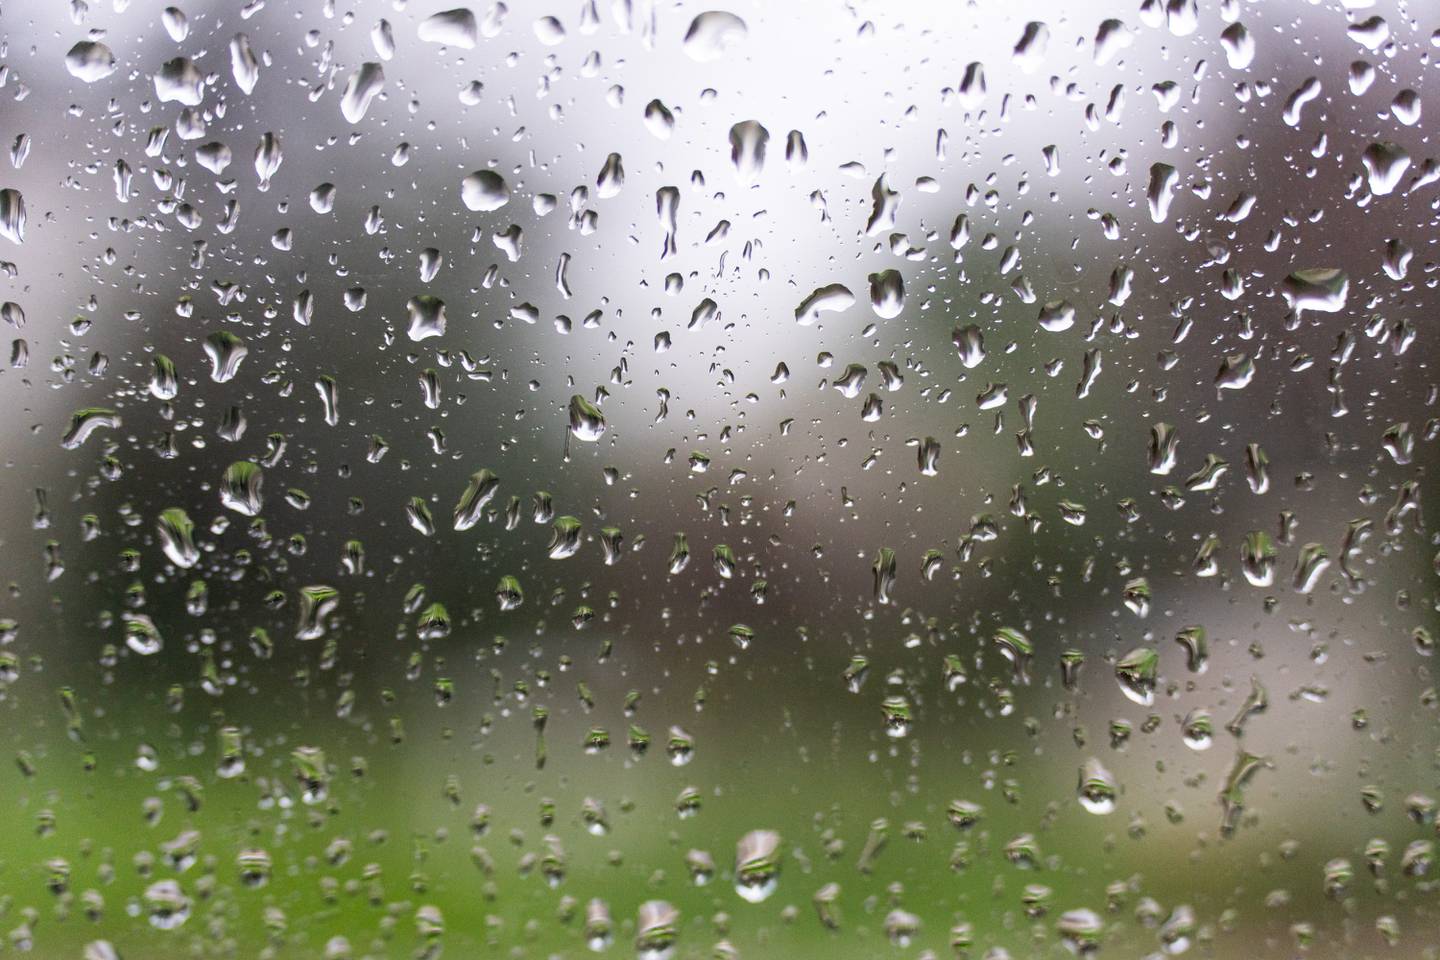 Raindrops are seen on a window.